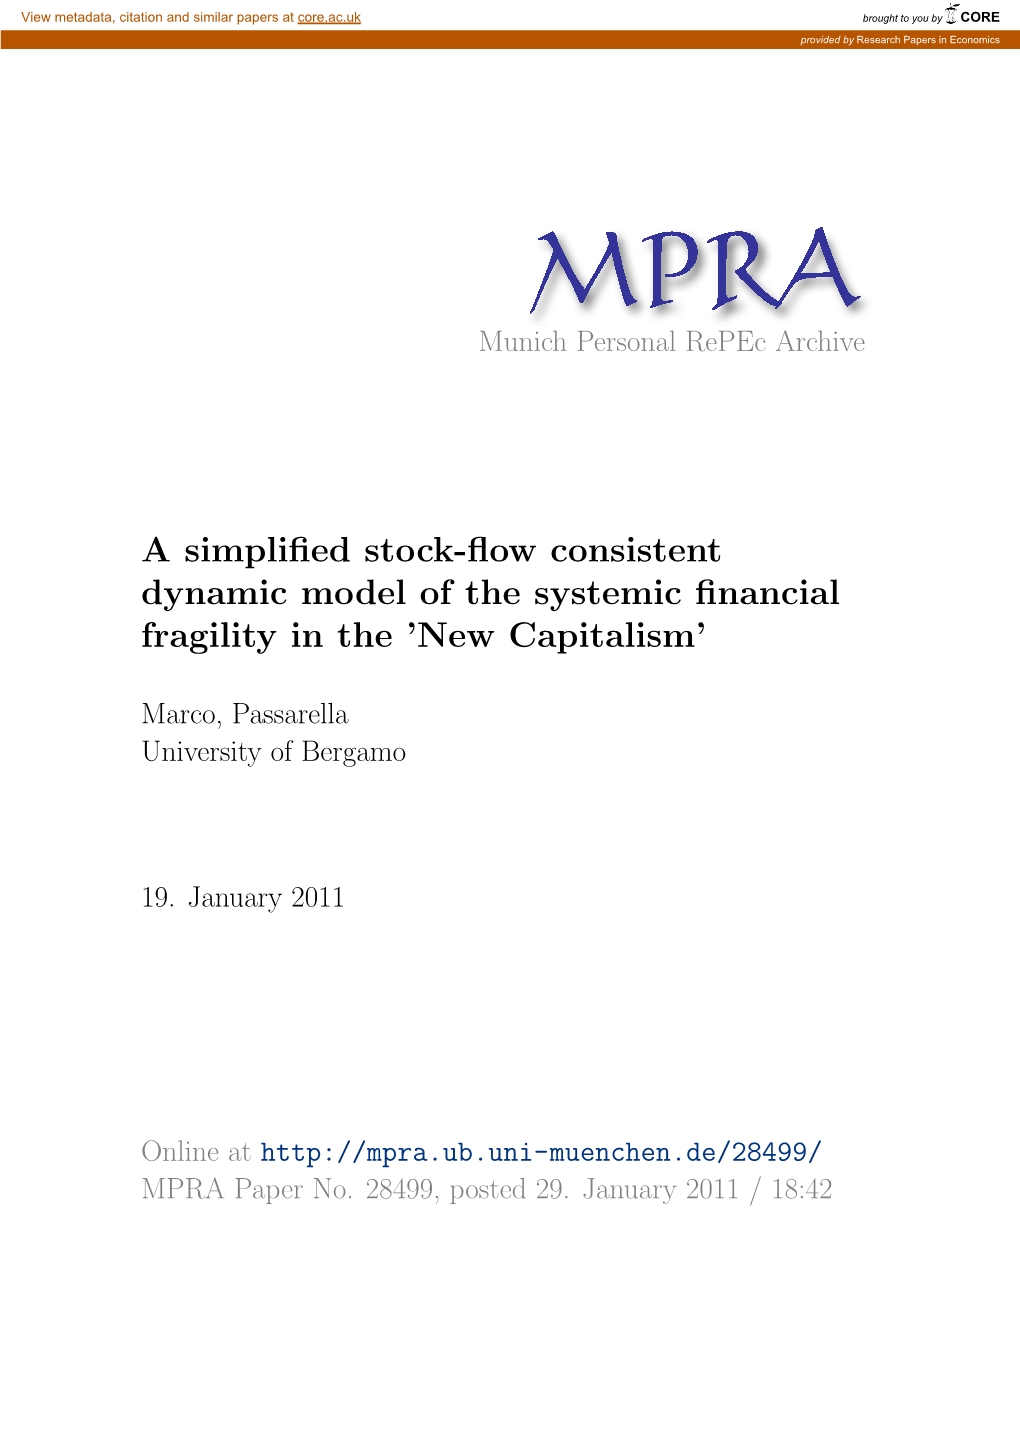 A Simplified Stock-Flow Consistent Dynamic Model of the Systemic Financial Fragility in the „New Capitalism‟